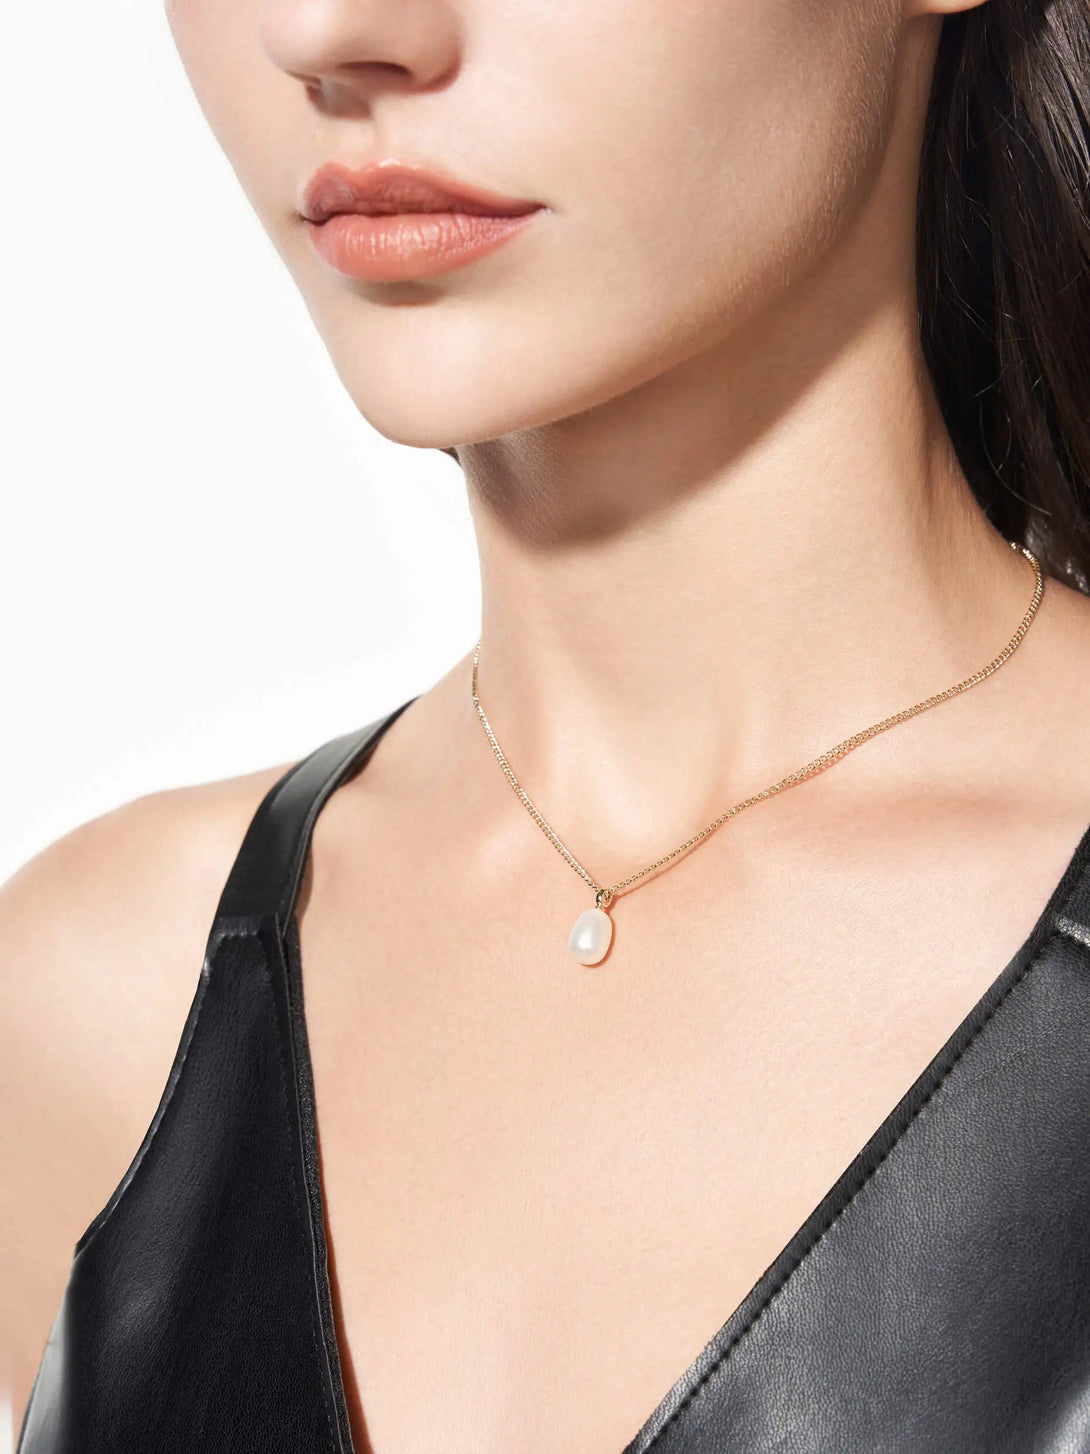 Daily Freshwater Pearl Pendant Necklace - OOTDY